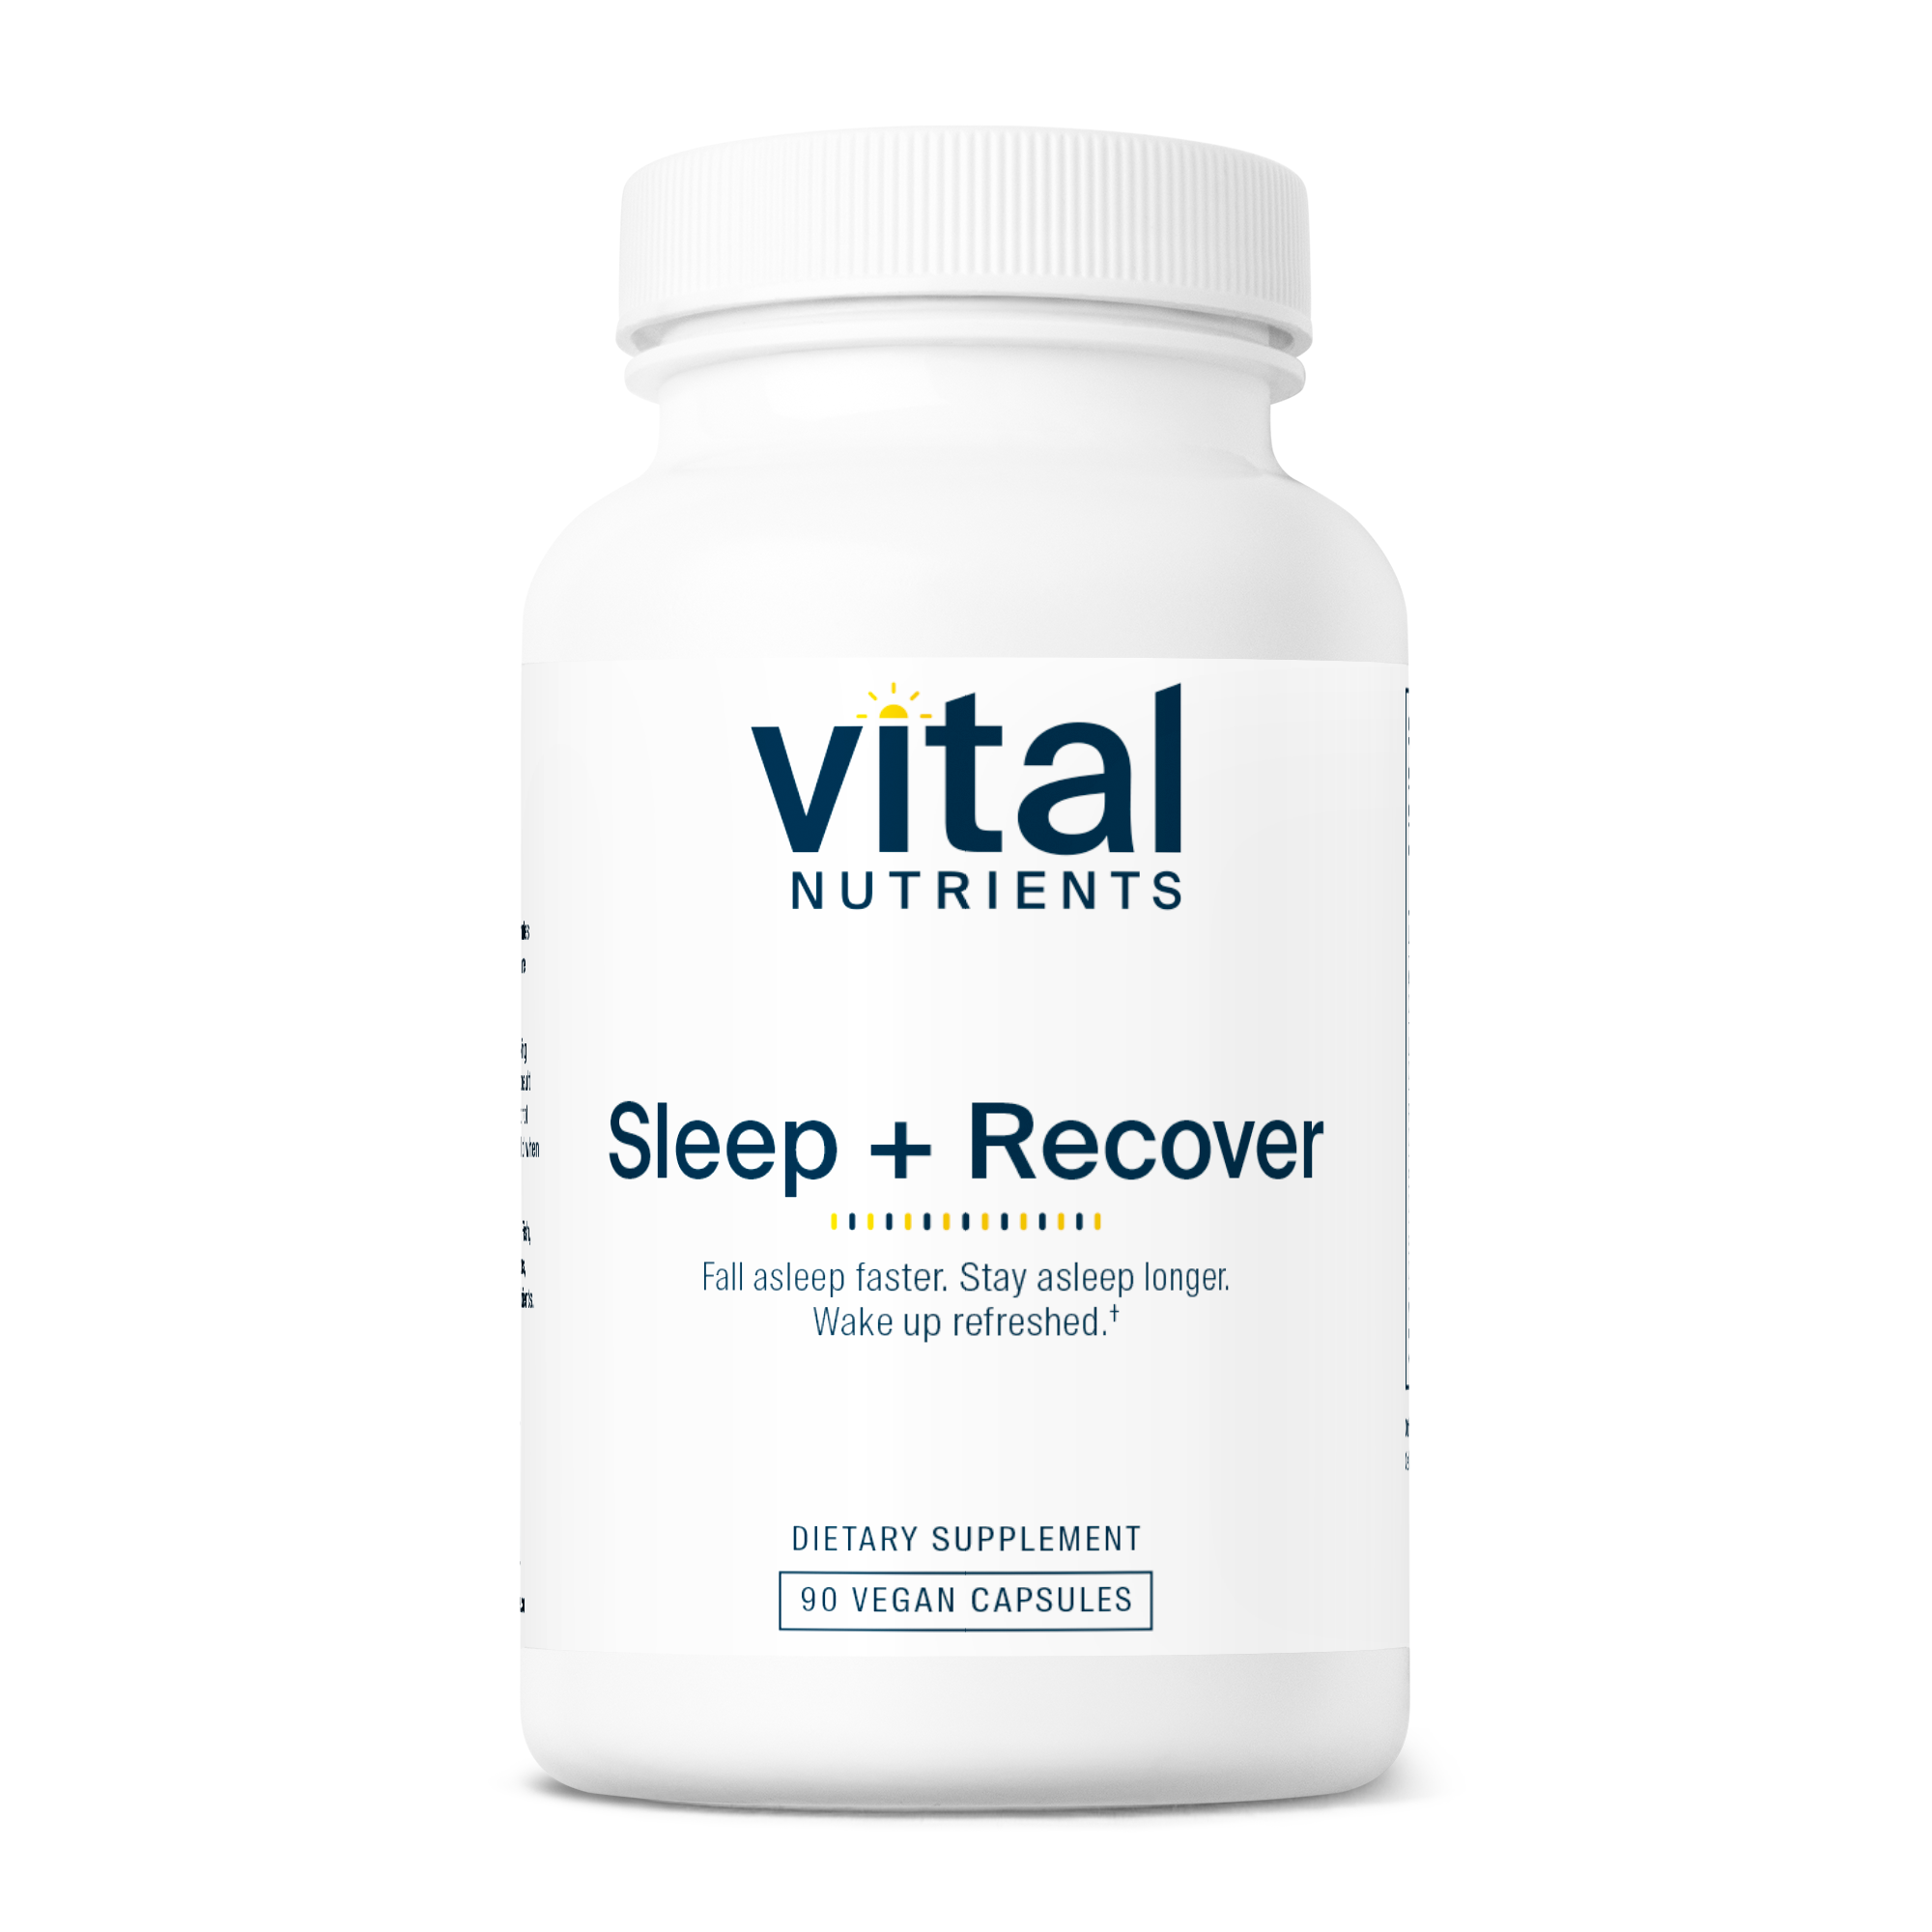 Vital Nutrients Sleep and Recover 90 count bottle image